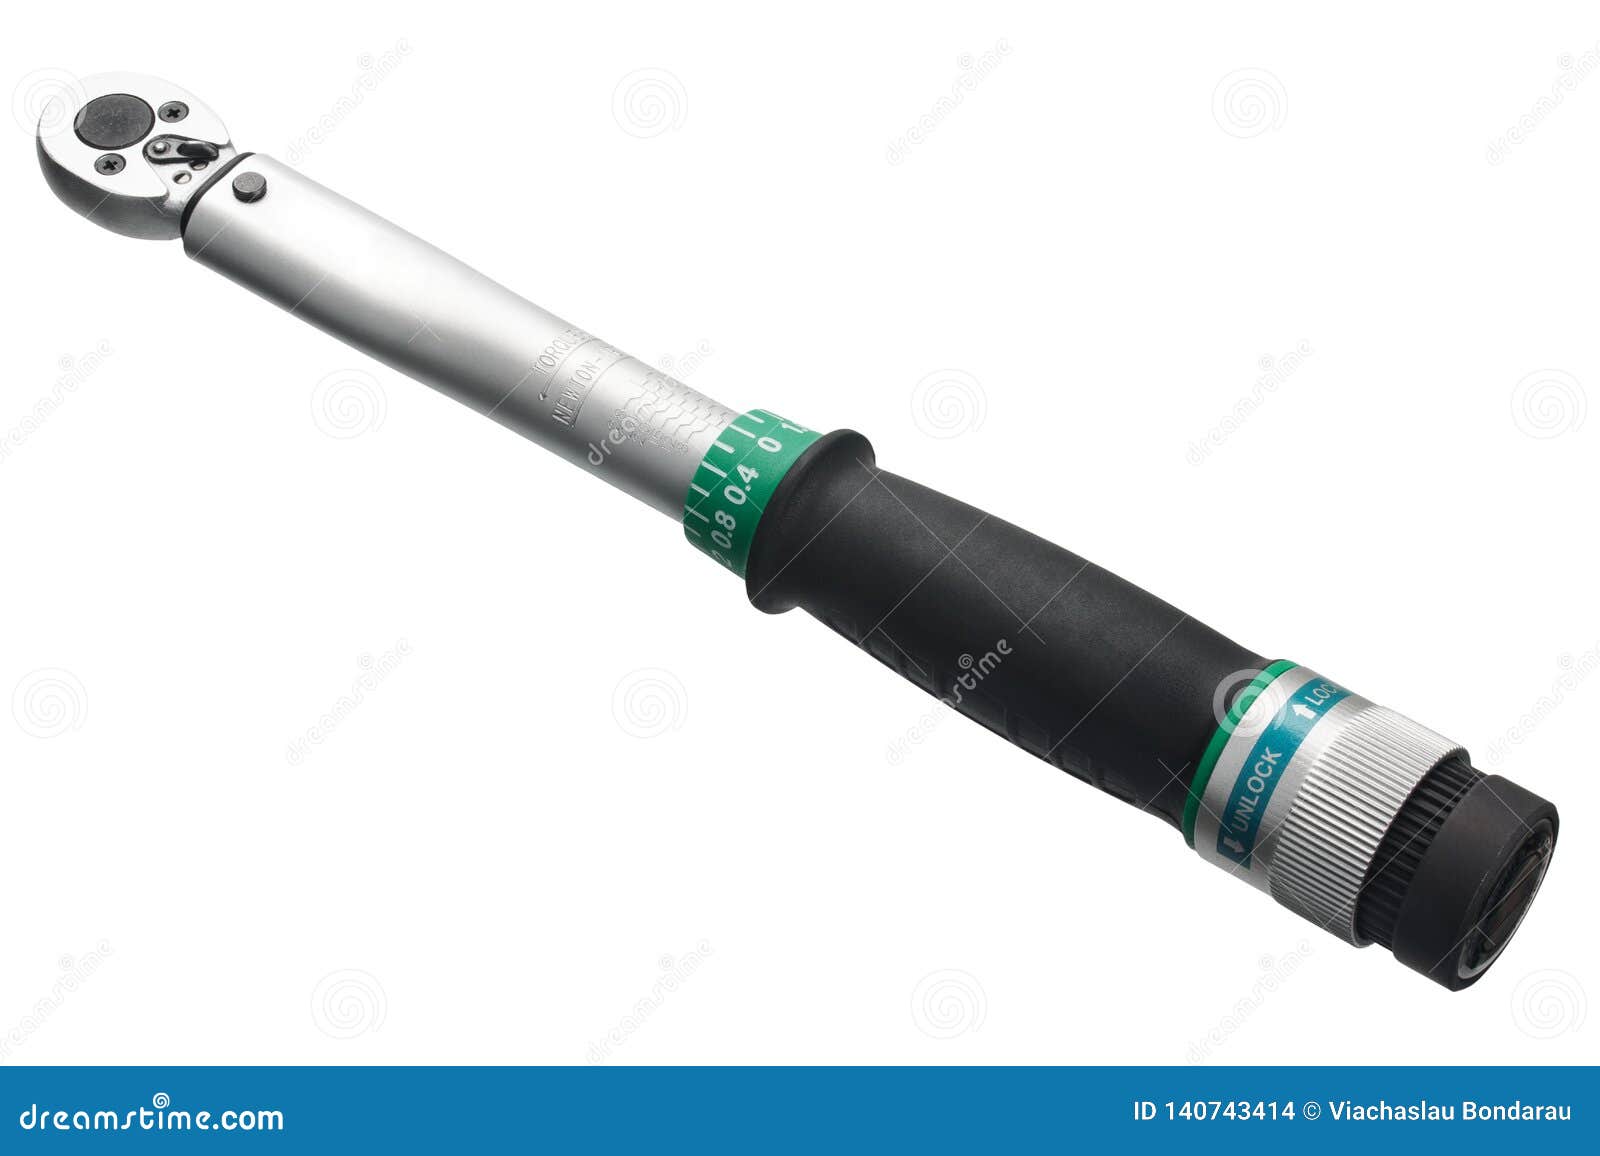 torque wrench on white background